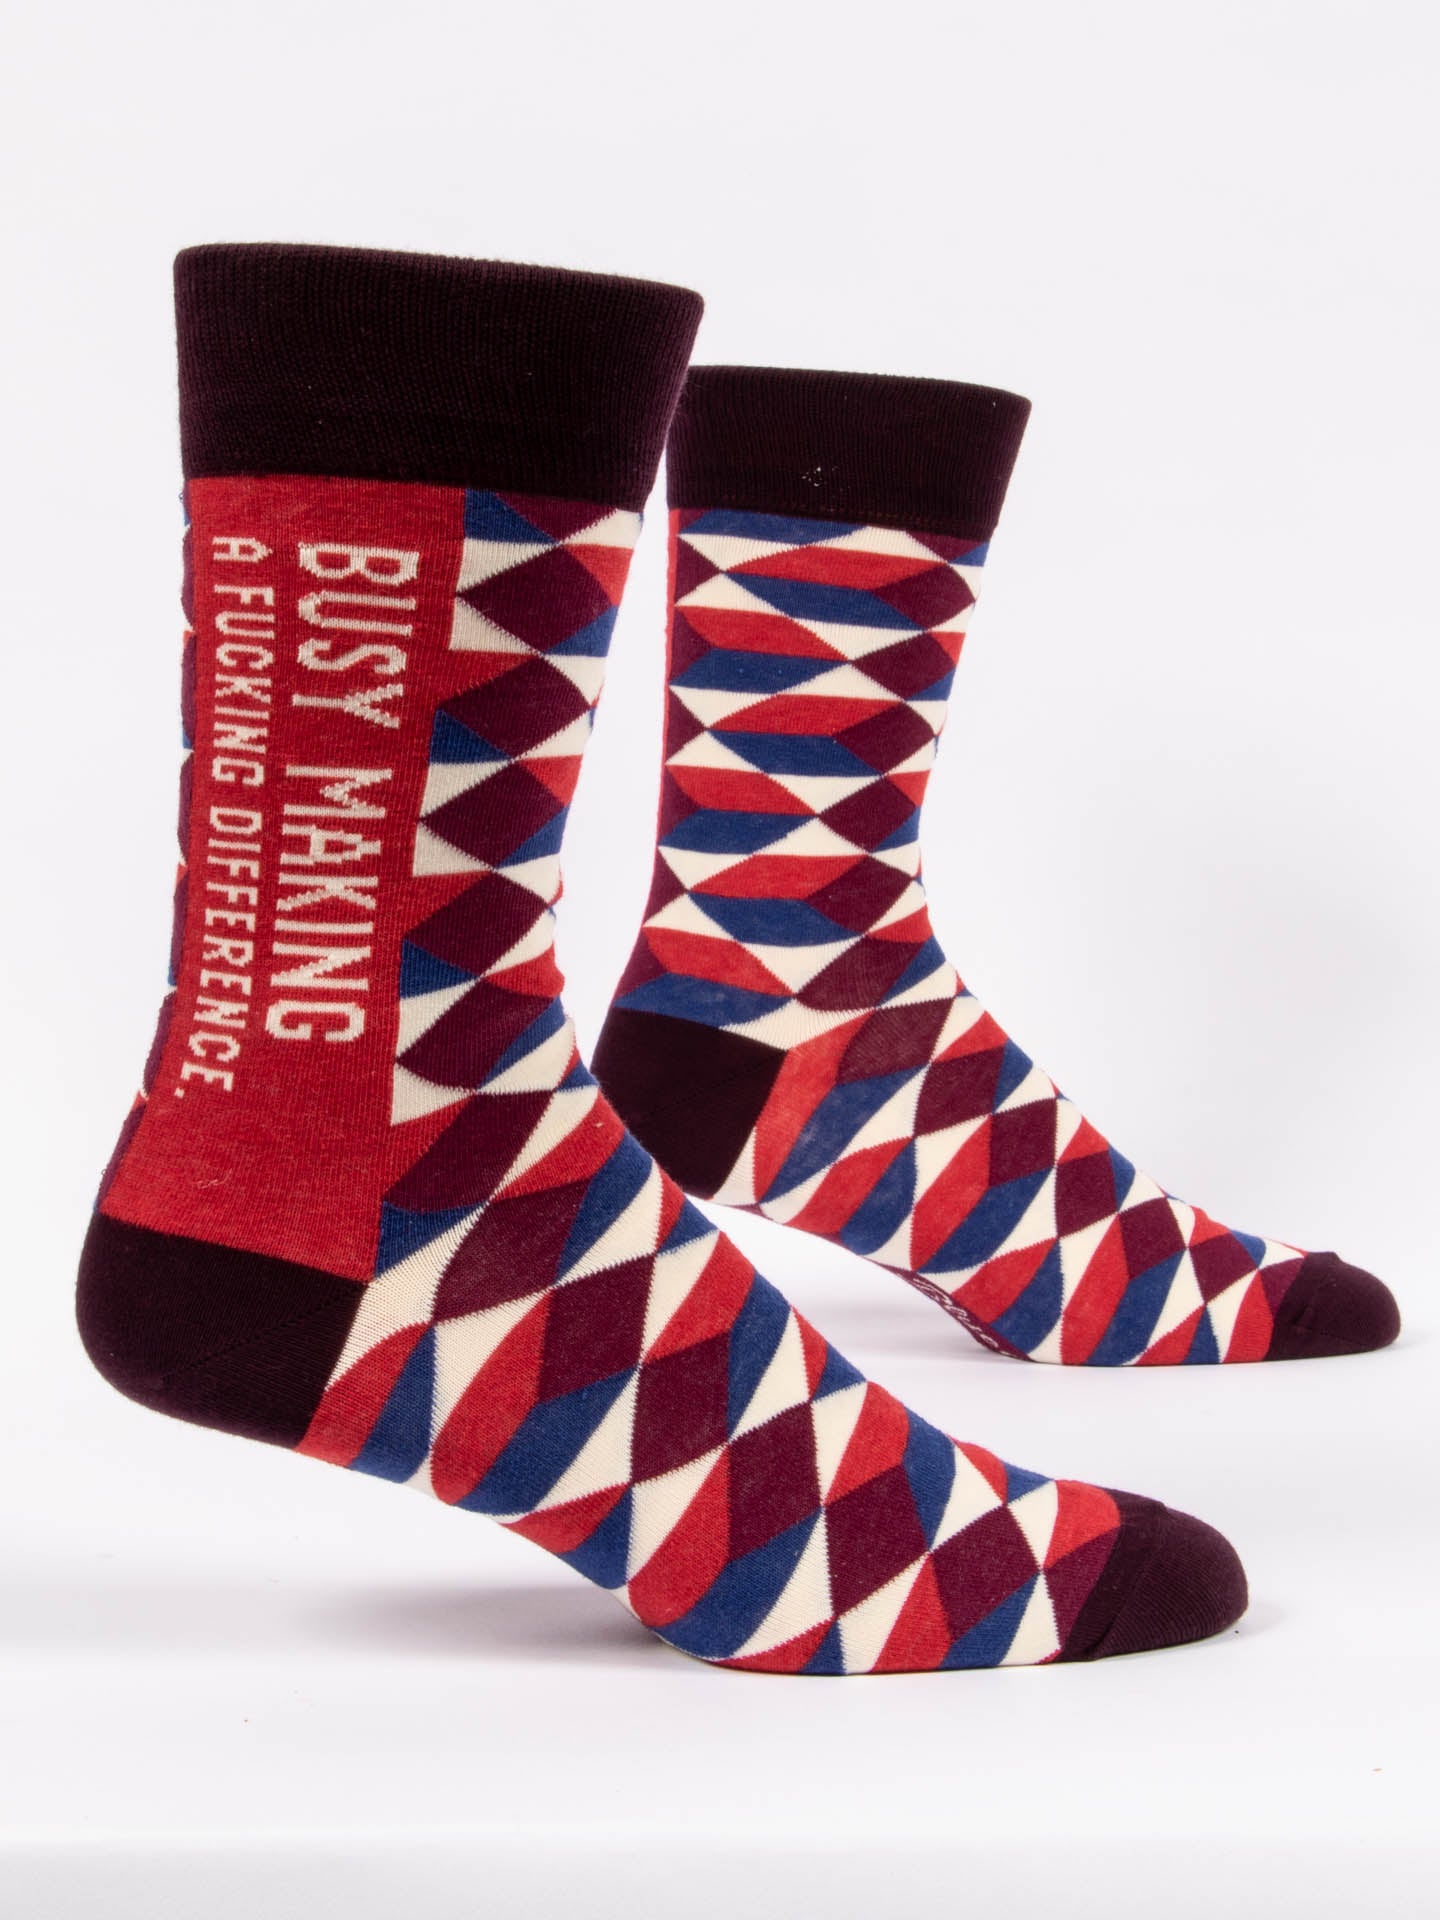 Making a Difference Men's Crew Socks